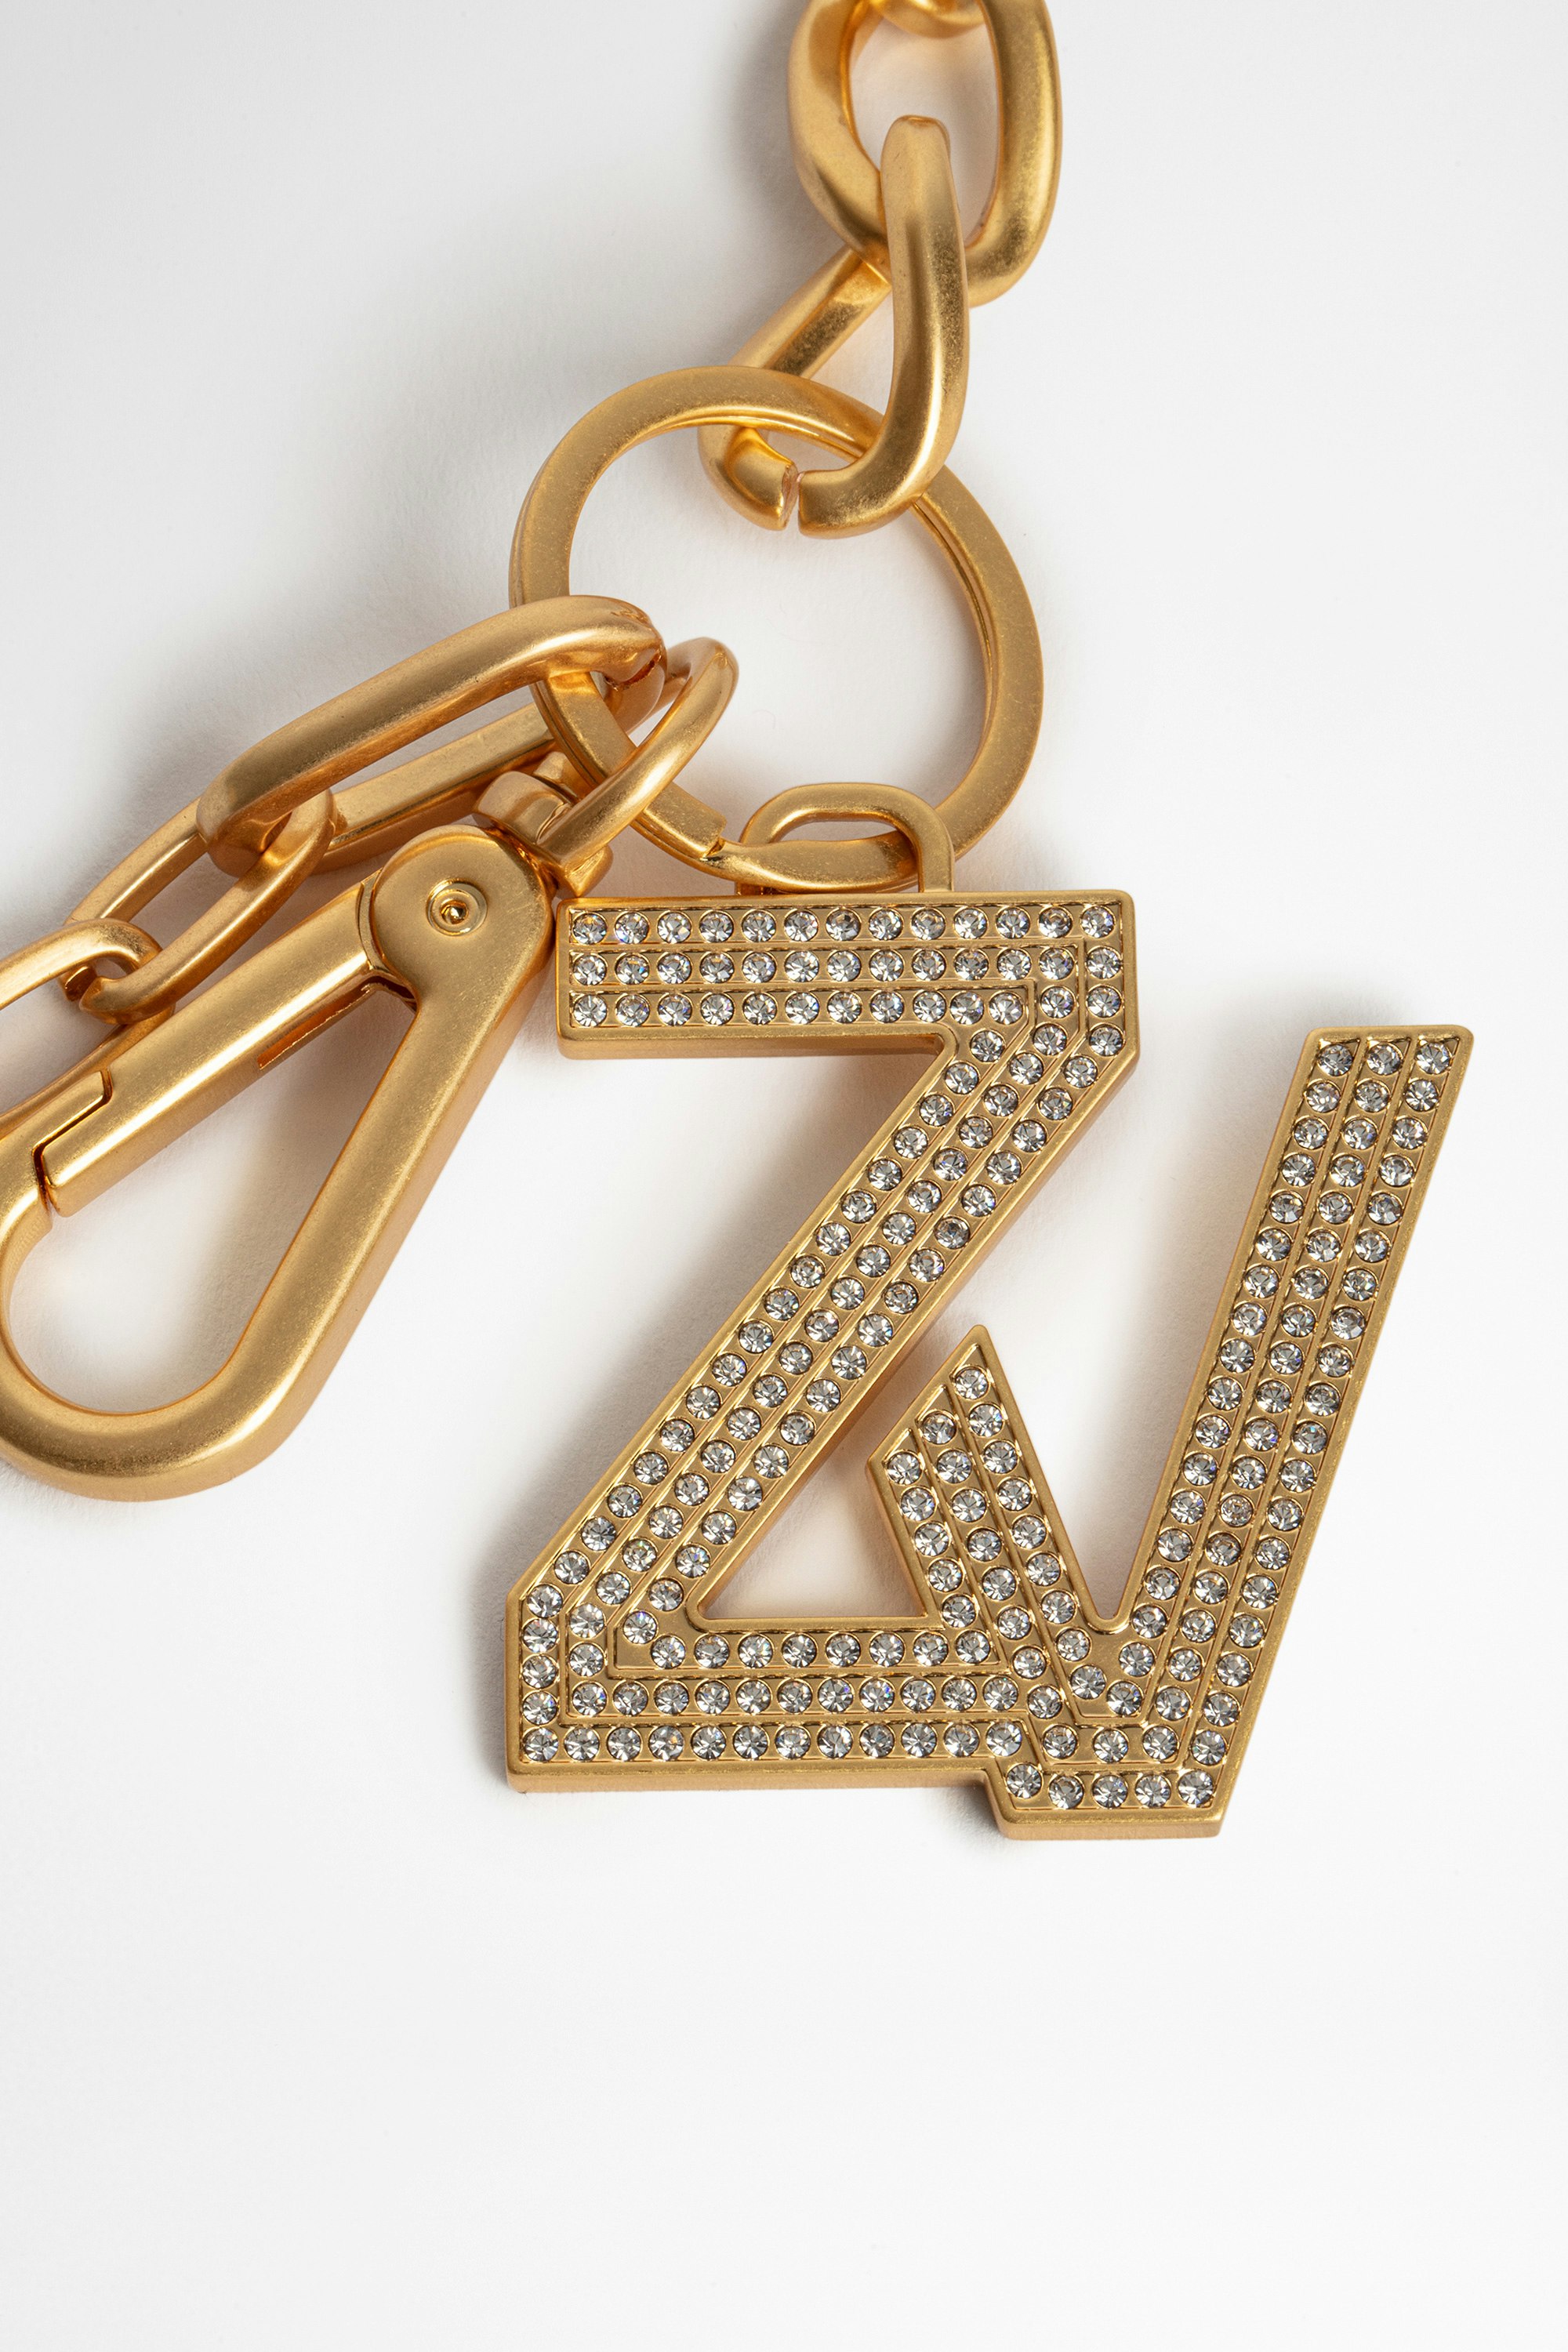 Porte-Clés ZV Initiale Le Keyring Strass